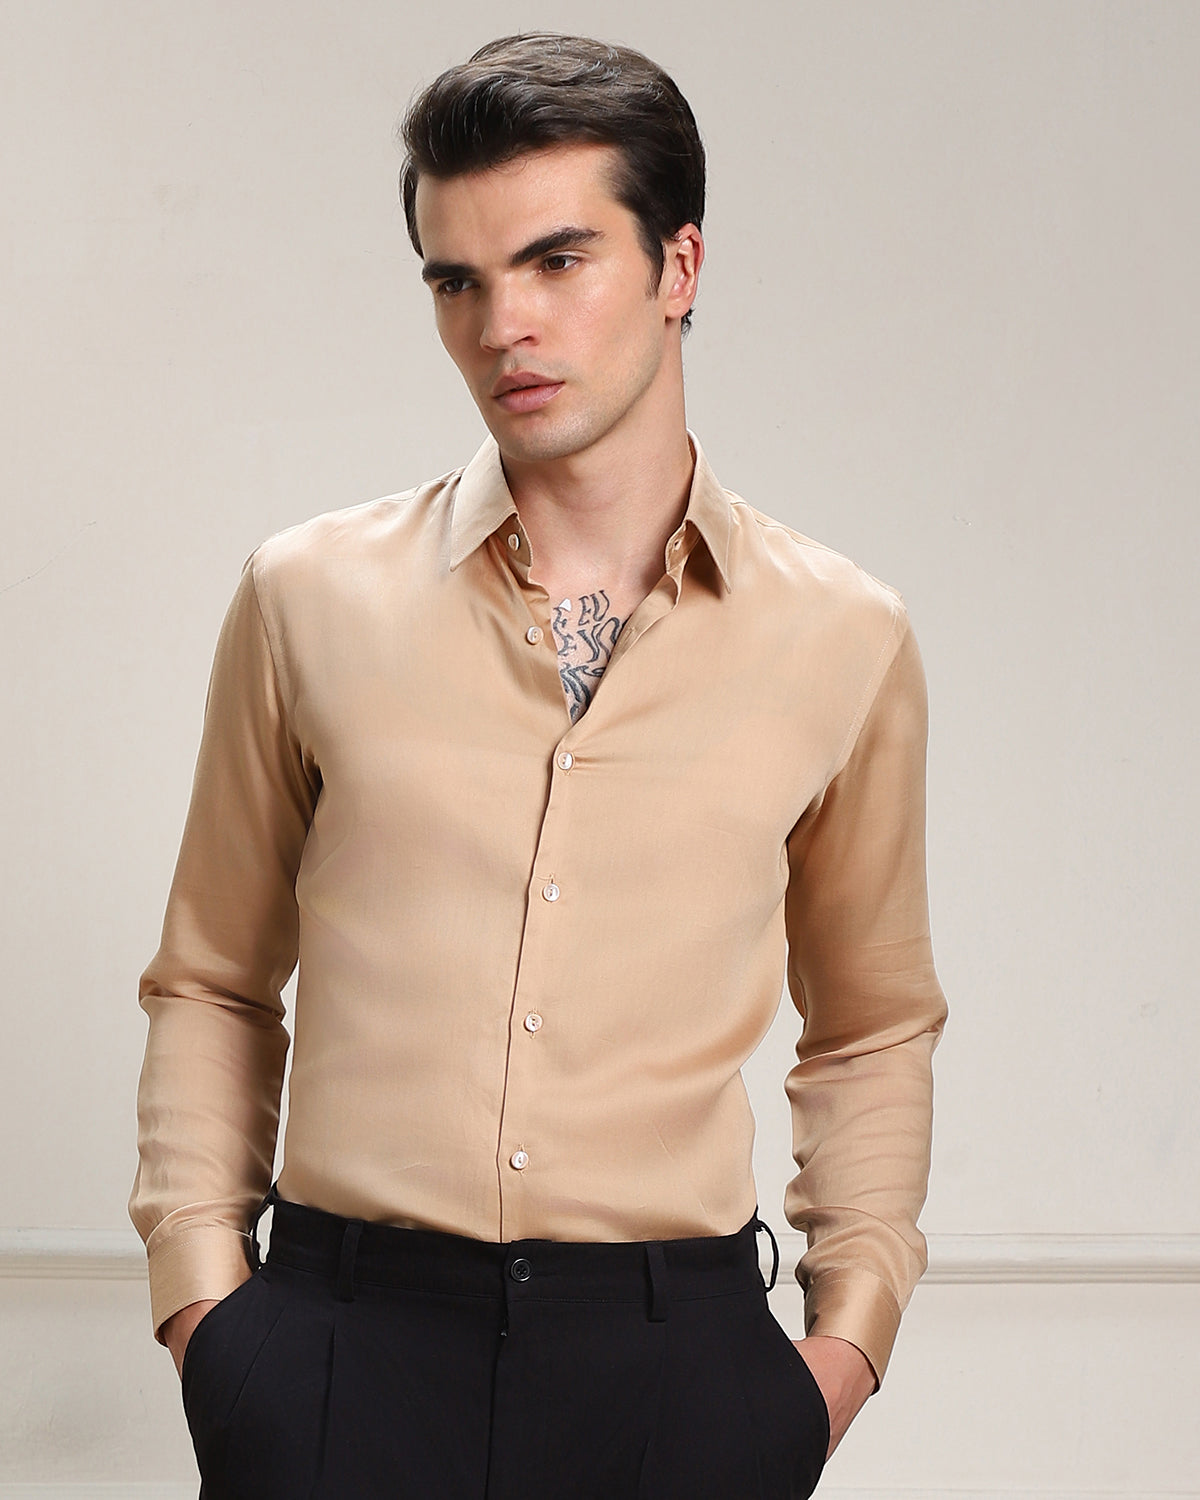 Organic And Sustainable Classic Champagne Lenzing Shirt